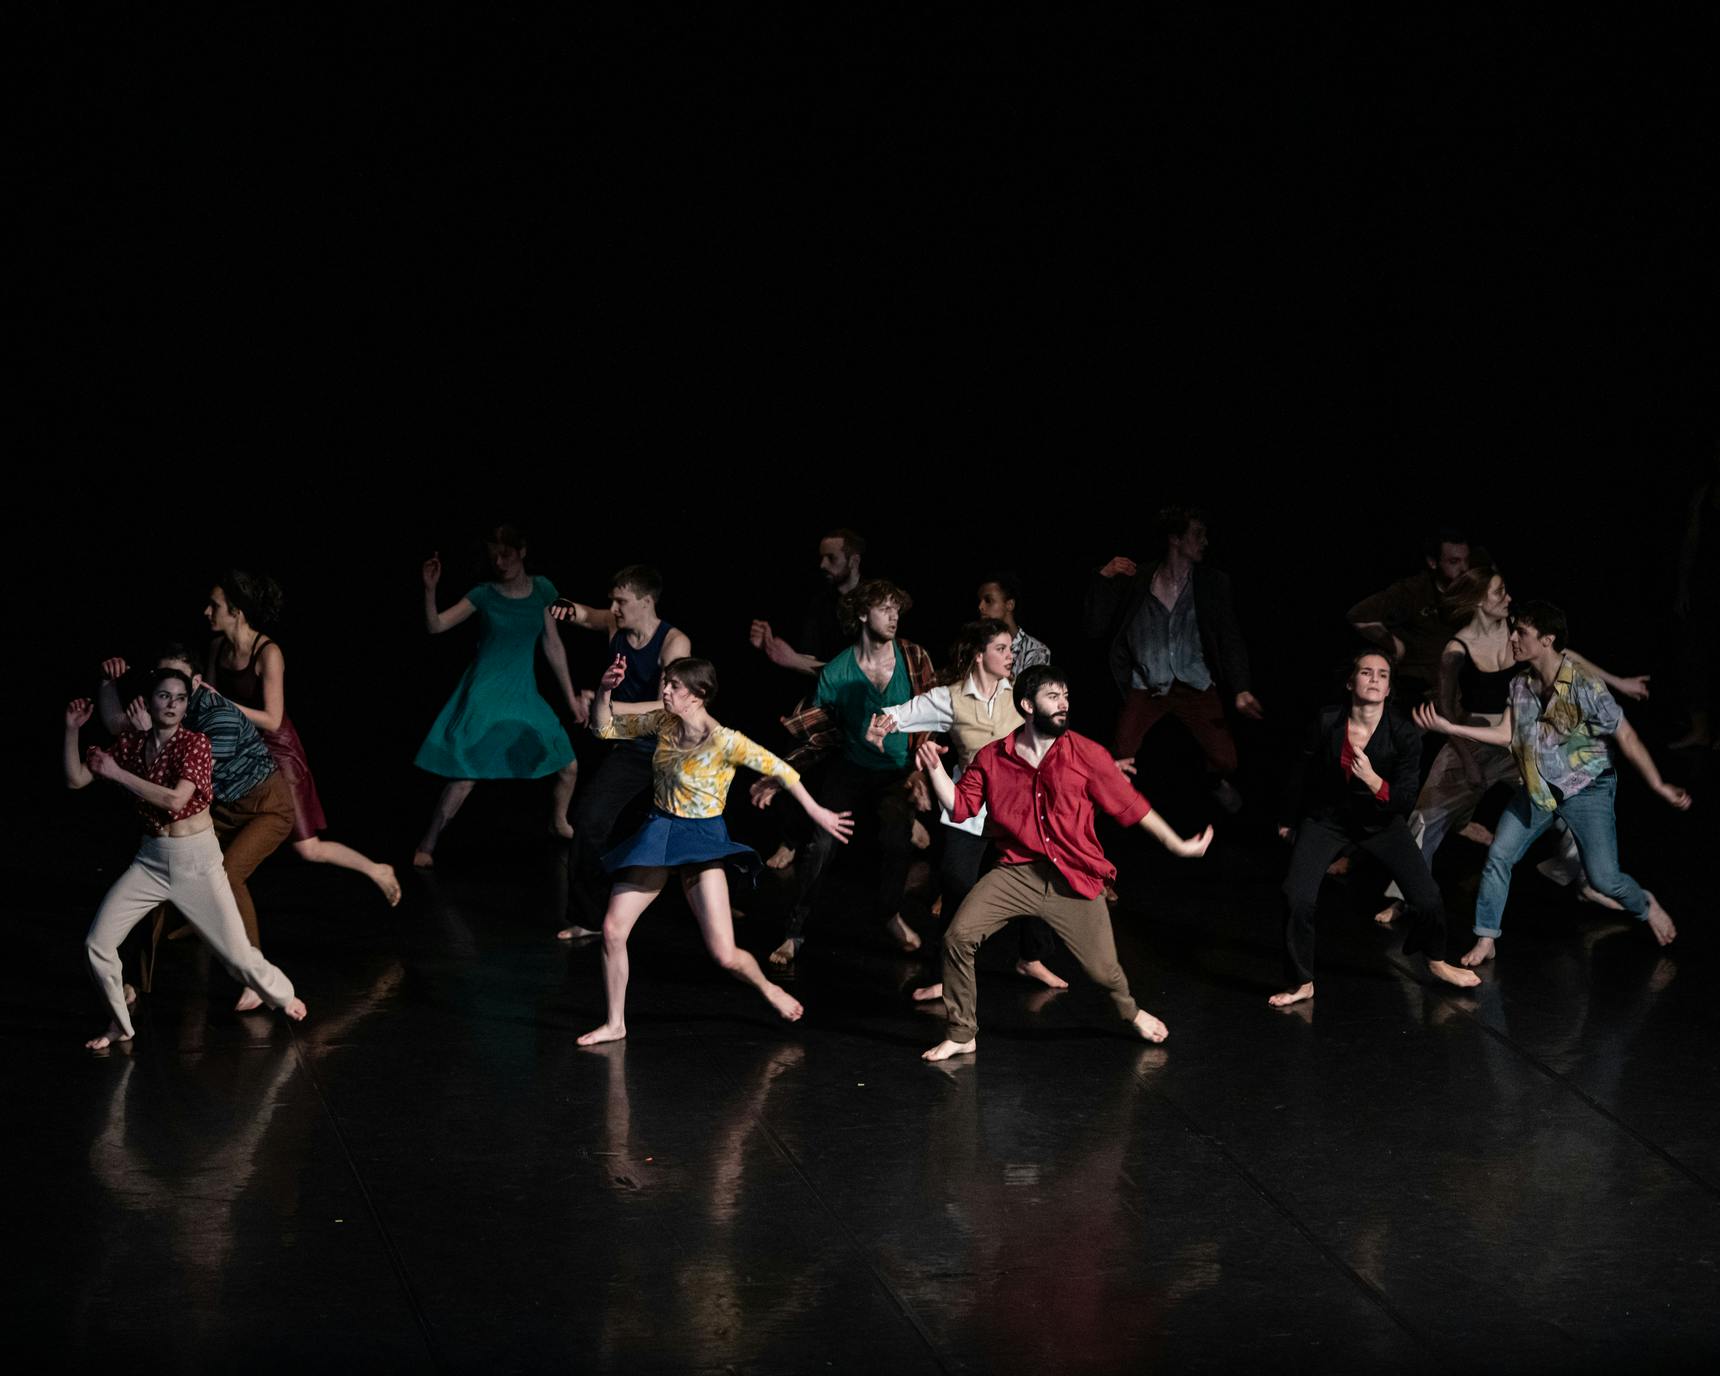 A group of performers in colorful clothing dance in the space. The figures emerge from a dark background.